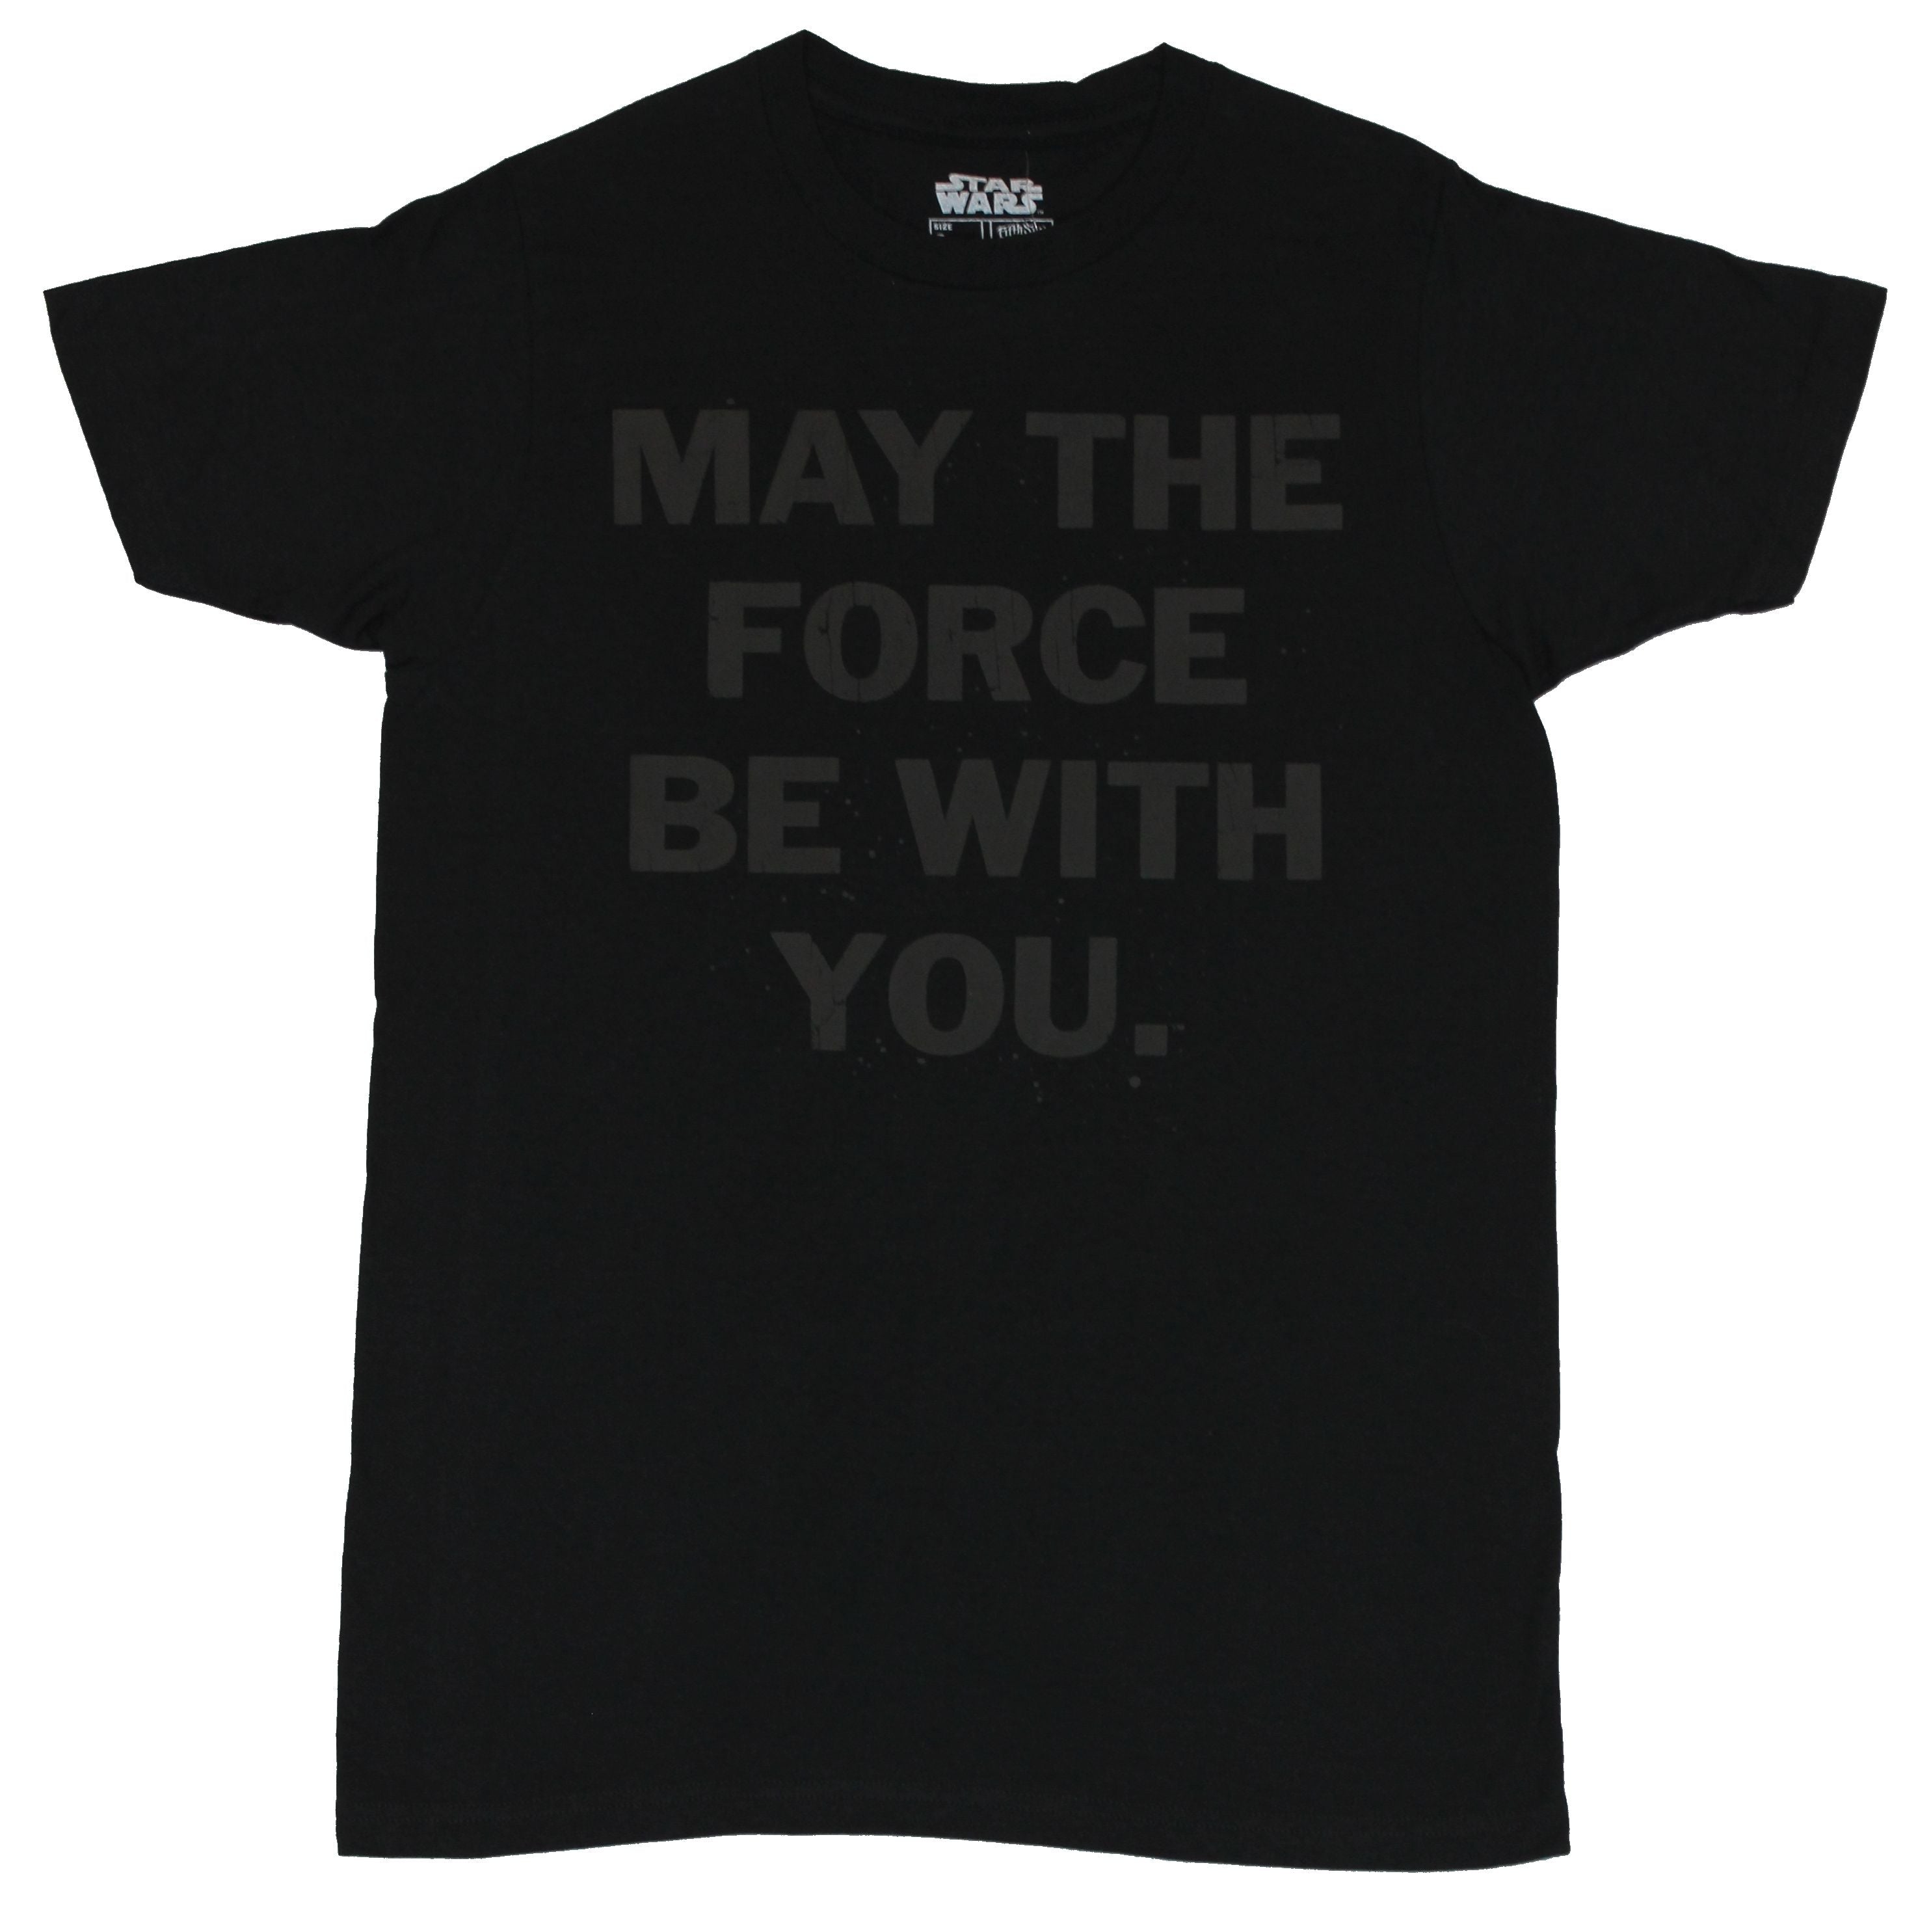 Star Wars Mens T-Shirt - May the Force Be With You Black on Black Print Image